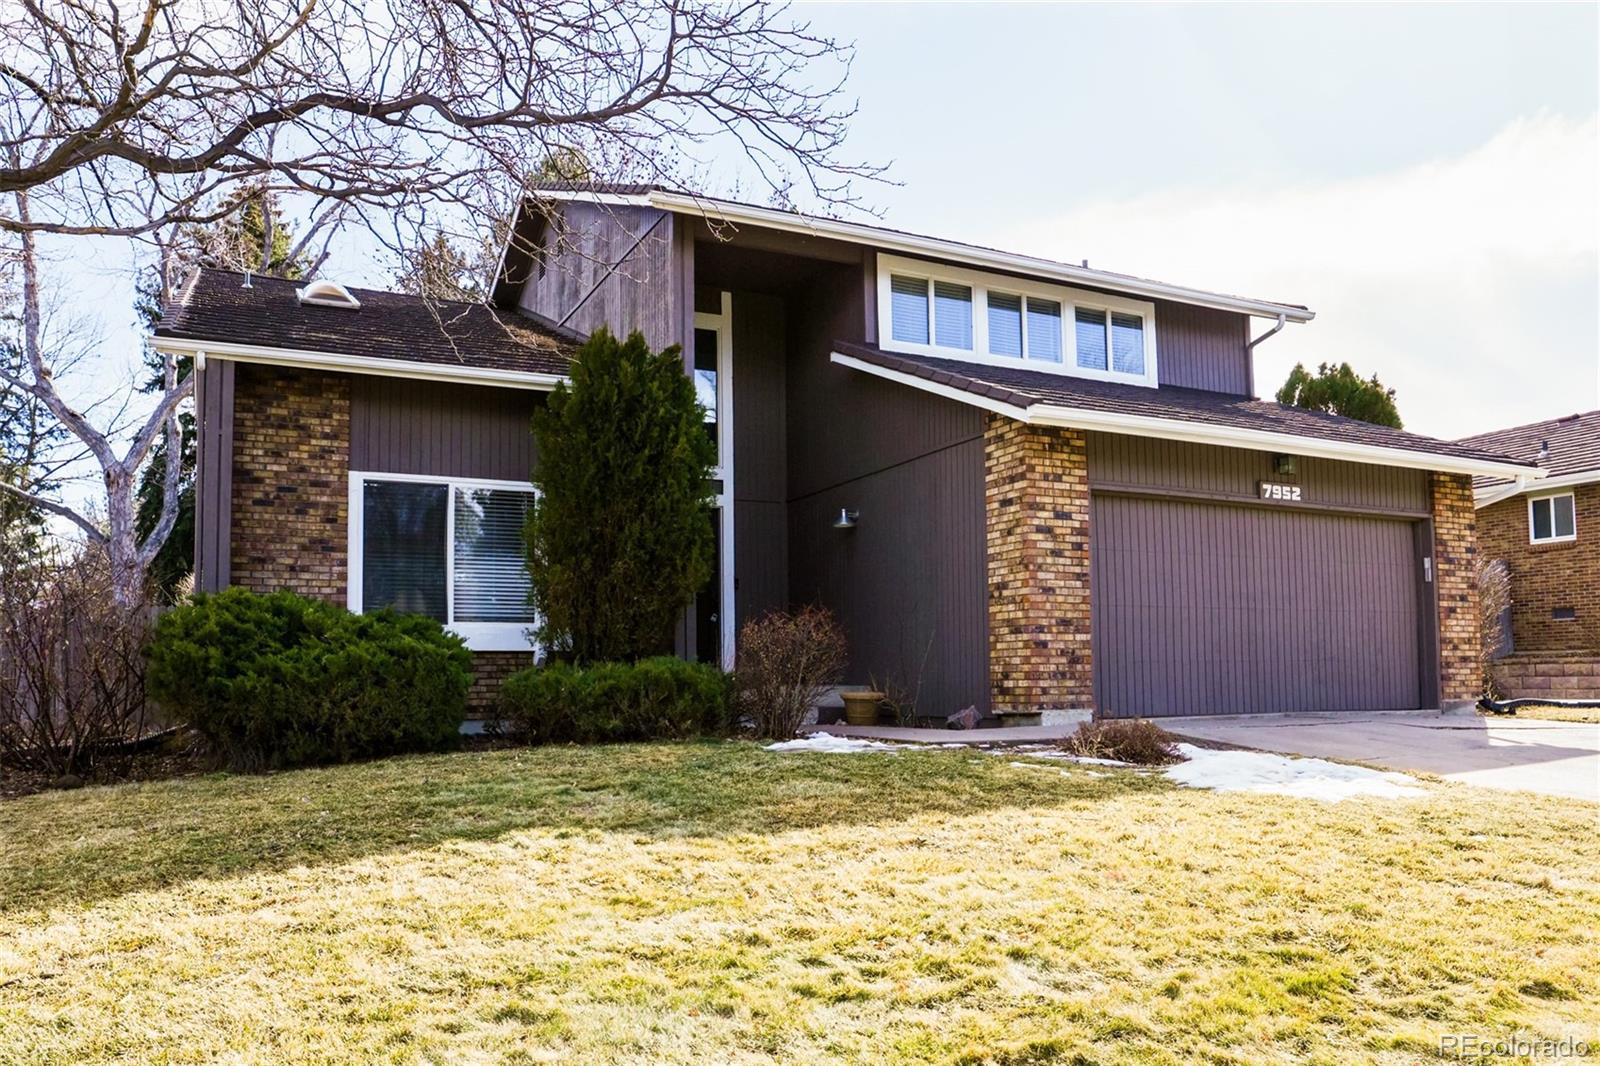 7952 s vance street, littleton sold home. Closed on 2024-03-22 for $685,000.